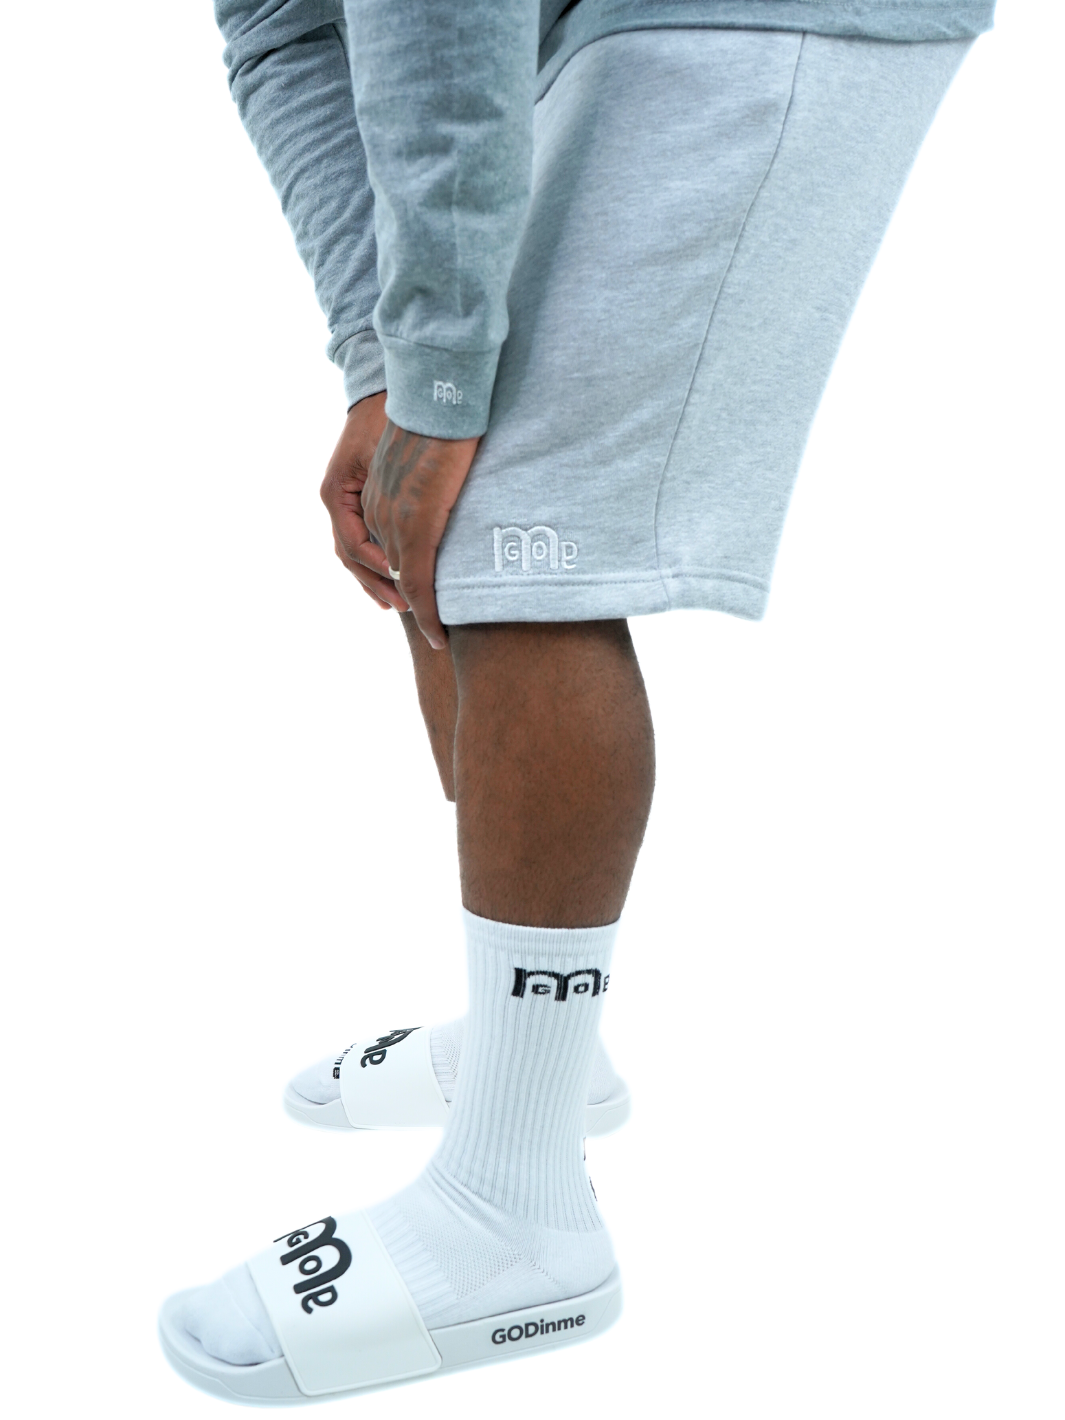 Perfect for any occasion, these Grey GODinme shorts provide an actively casual fit, jersey lined side and back pockets, elastic waistband, sewn eyelets, and fly details: providing the ultimate pair of shorts for any man of faith. But the White GODinme logo at left leg is the tell all, combining faith with fashion.